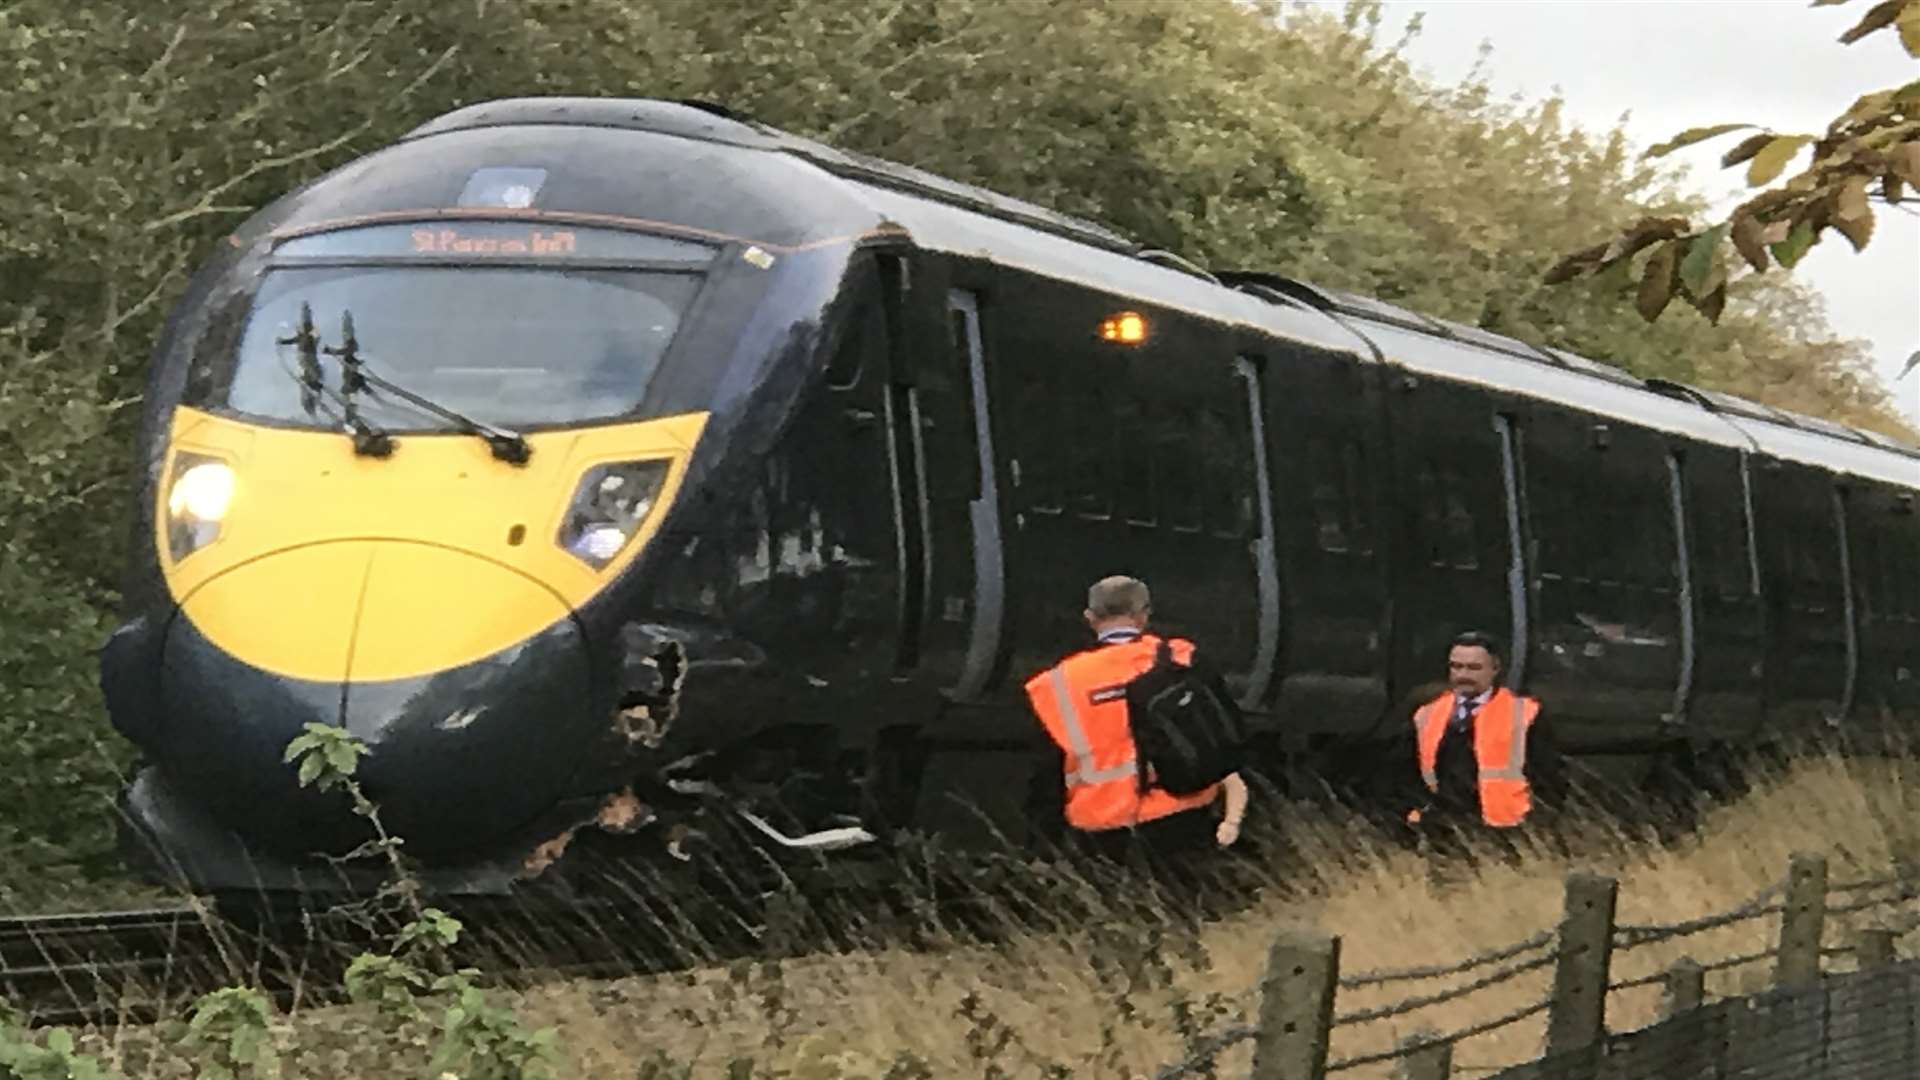 The train's nose cone was badly damaged